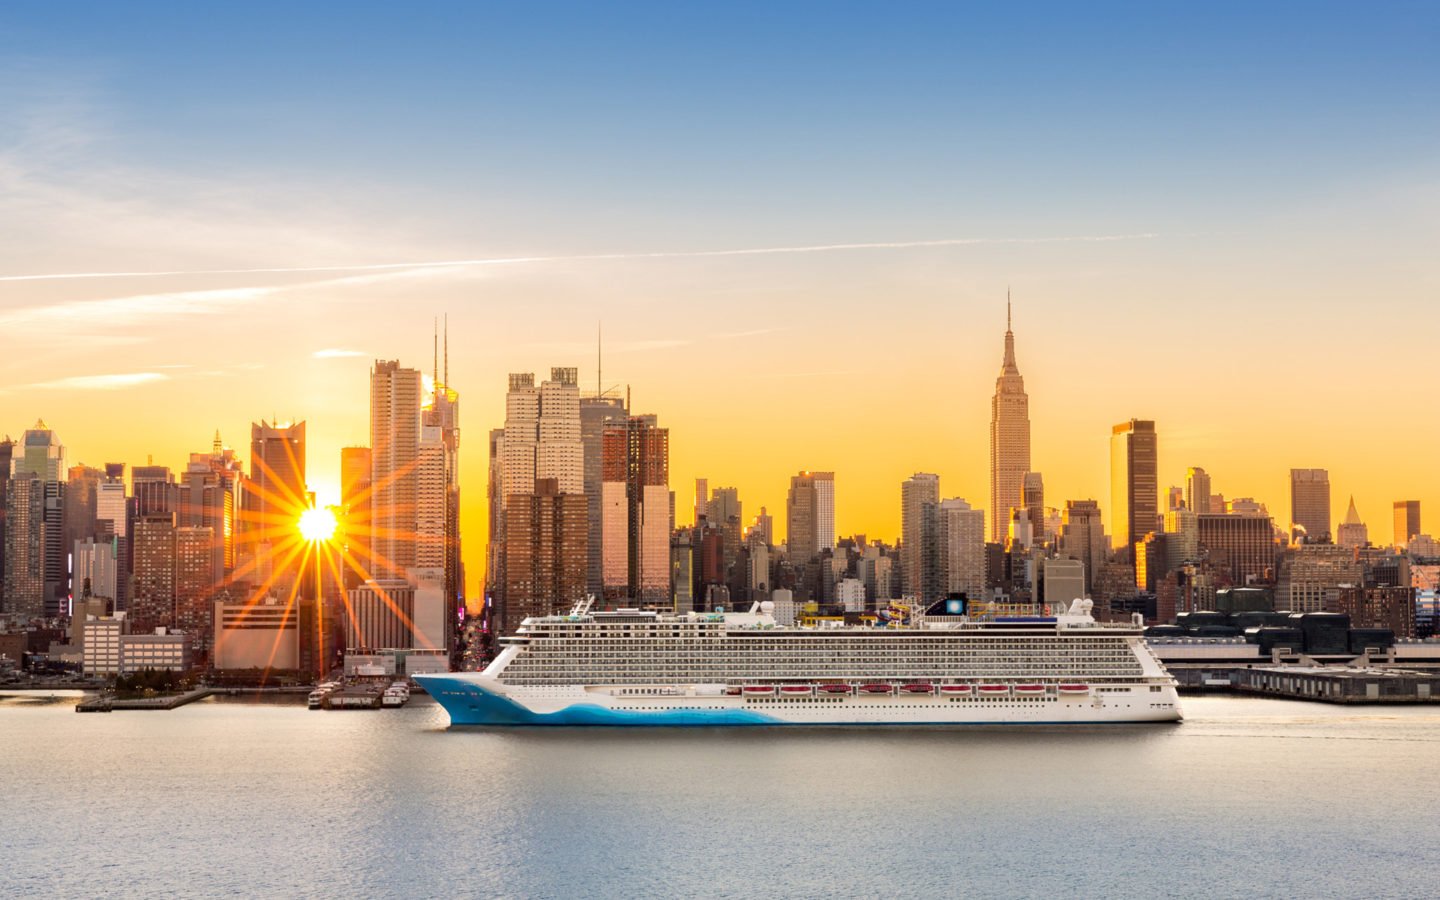 Sunrise New York City Skyline Sailing On The Cruise Ship In The Hudson River Weehawken United States Android Wallpaper For Your Desktop Or Phone, Wallpaper13.com